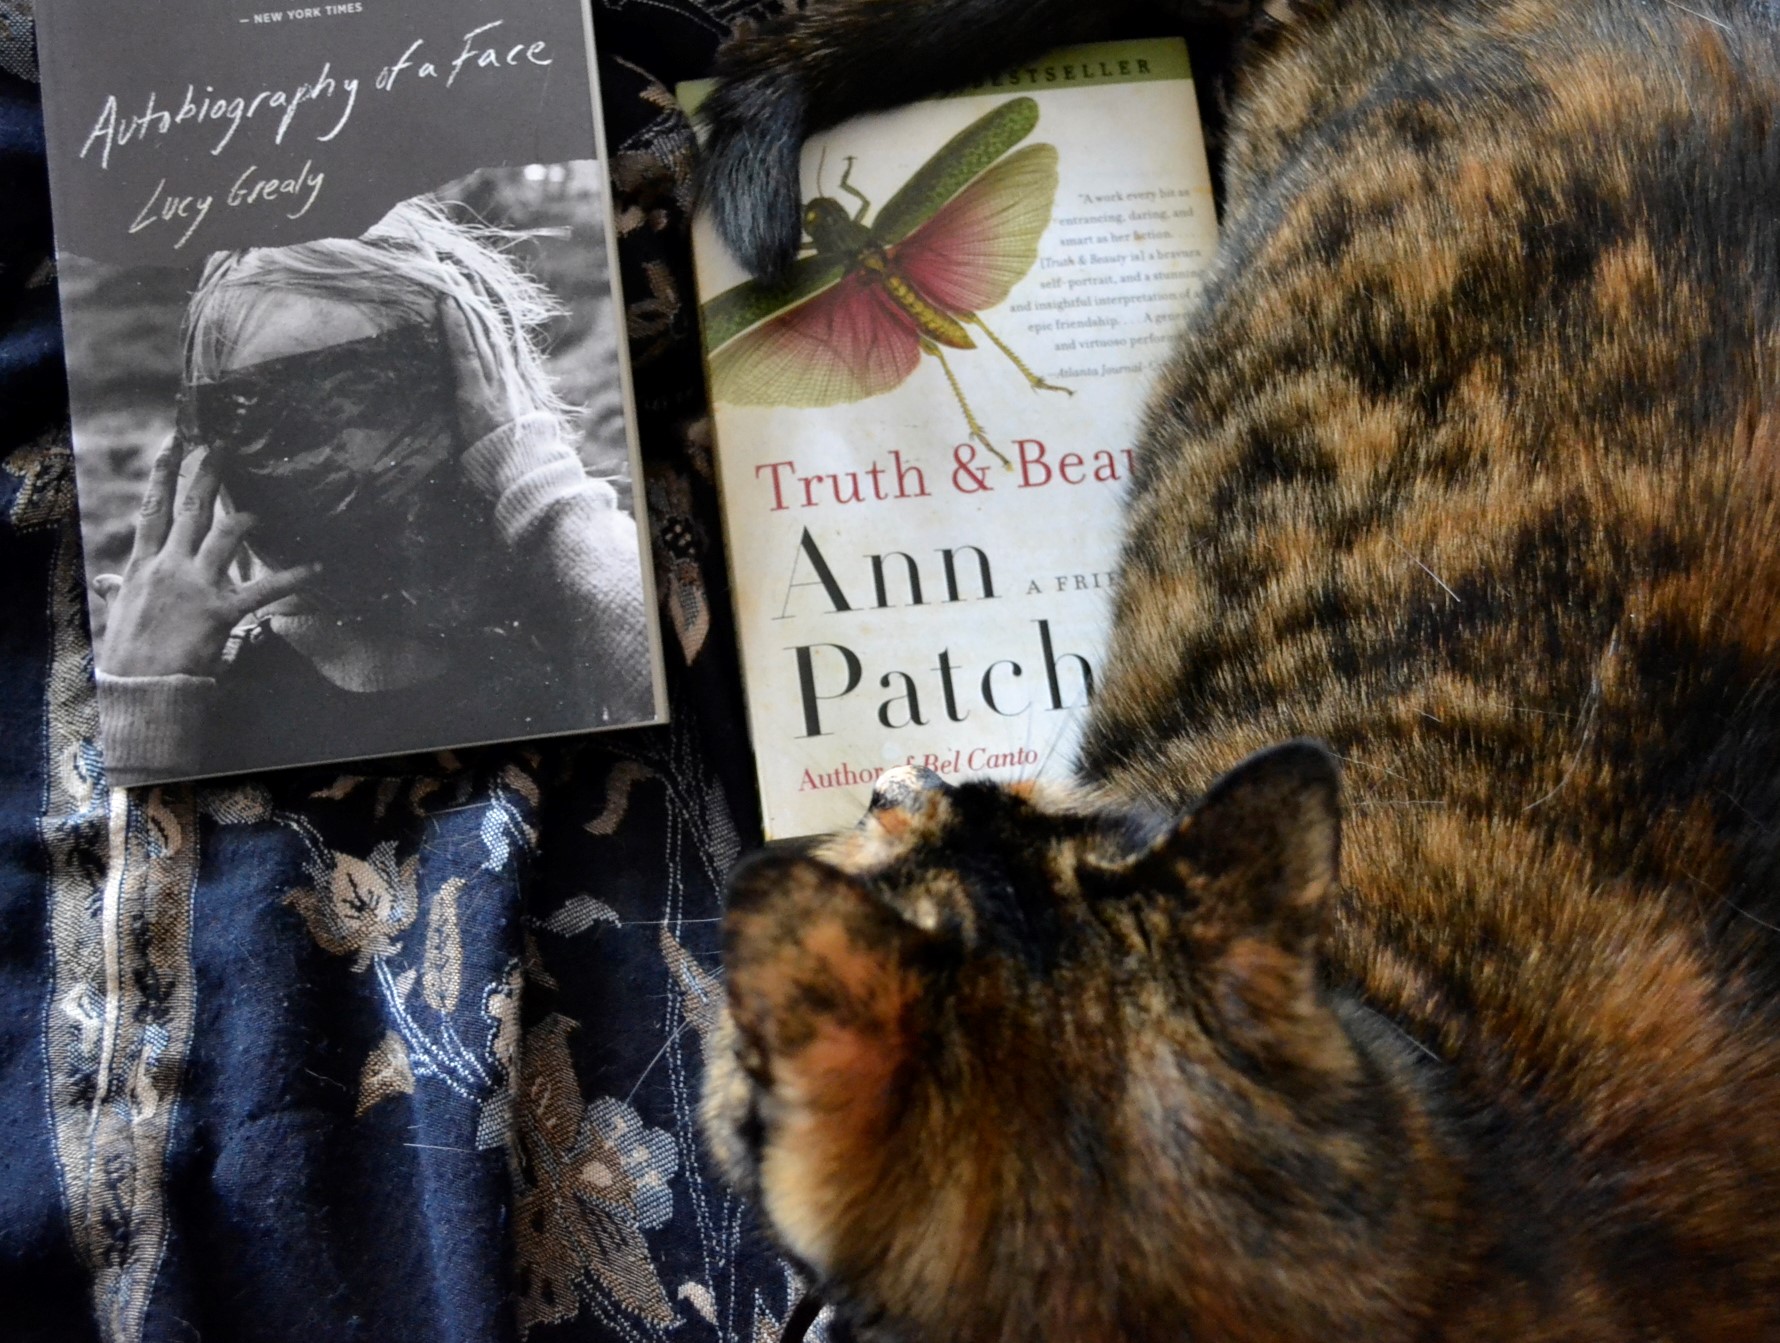 A tortie sits curled around two books: one with a picture of a grasshopper on it and one with a picture of a woman with a covered face.